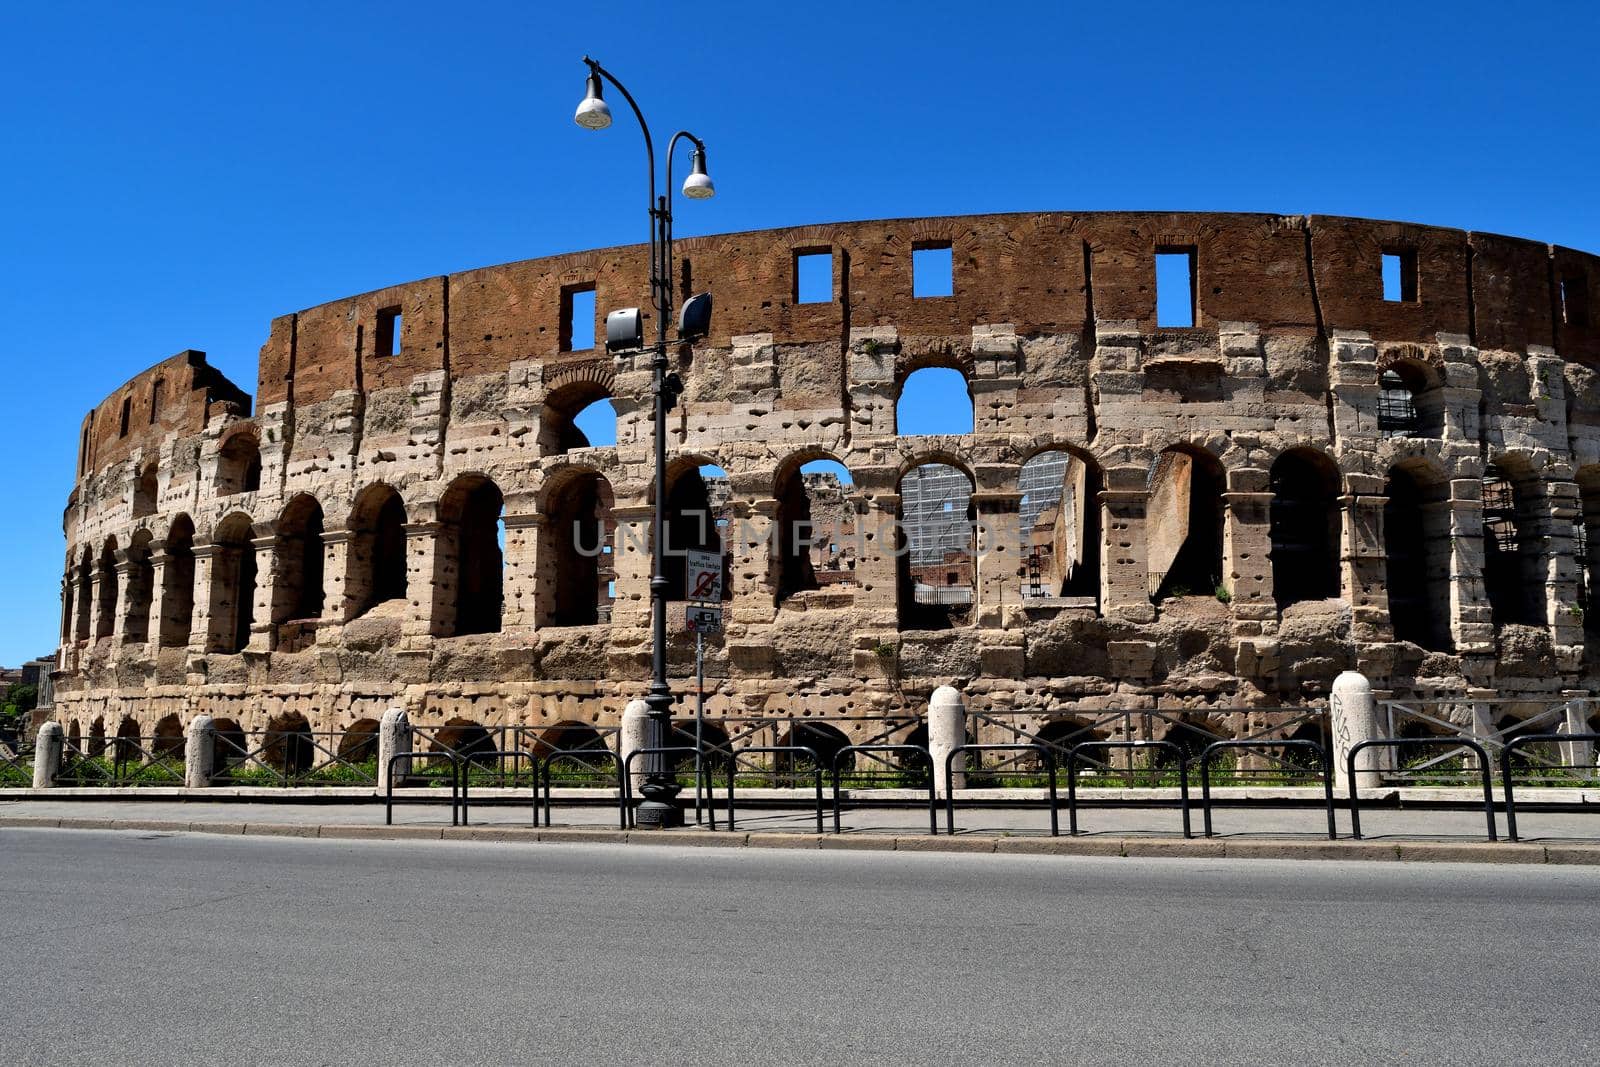 View of the Colosseum without tourists due to the phase 2 of lockdown